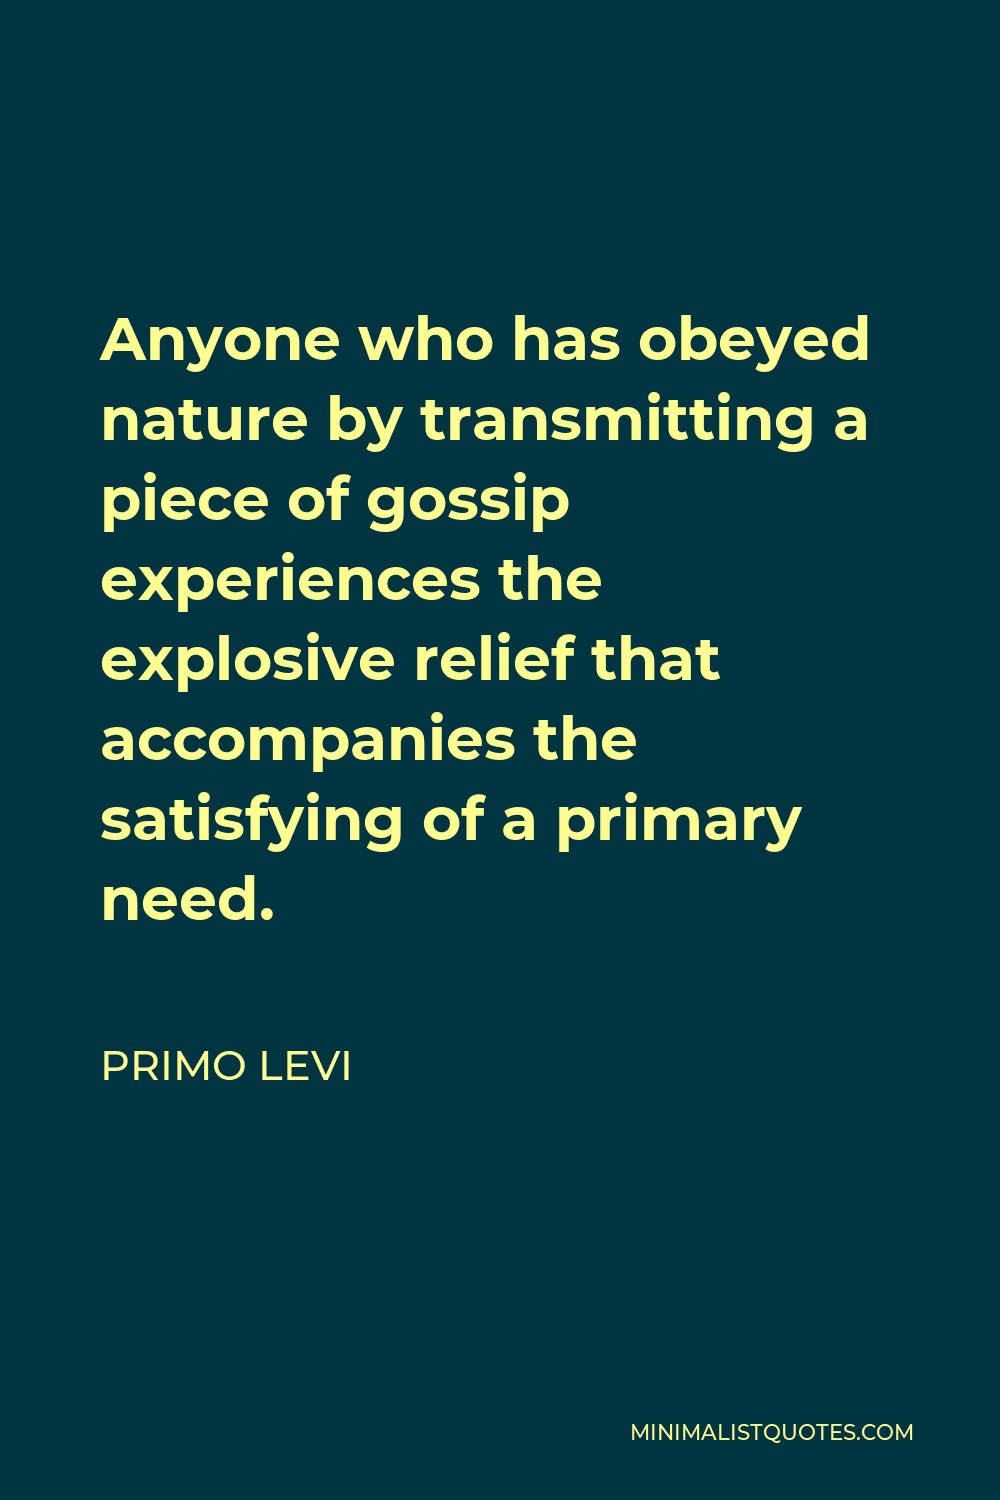 Primo Levi Quote - Anyone who has obeyed nature by transmitting a piece of gossip experiences the explosive relief that accompanies the satisfying of a primary need.